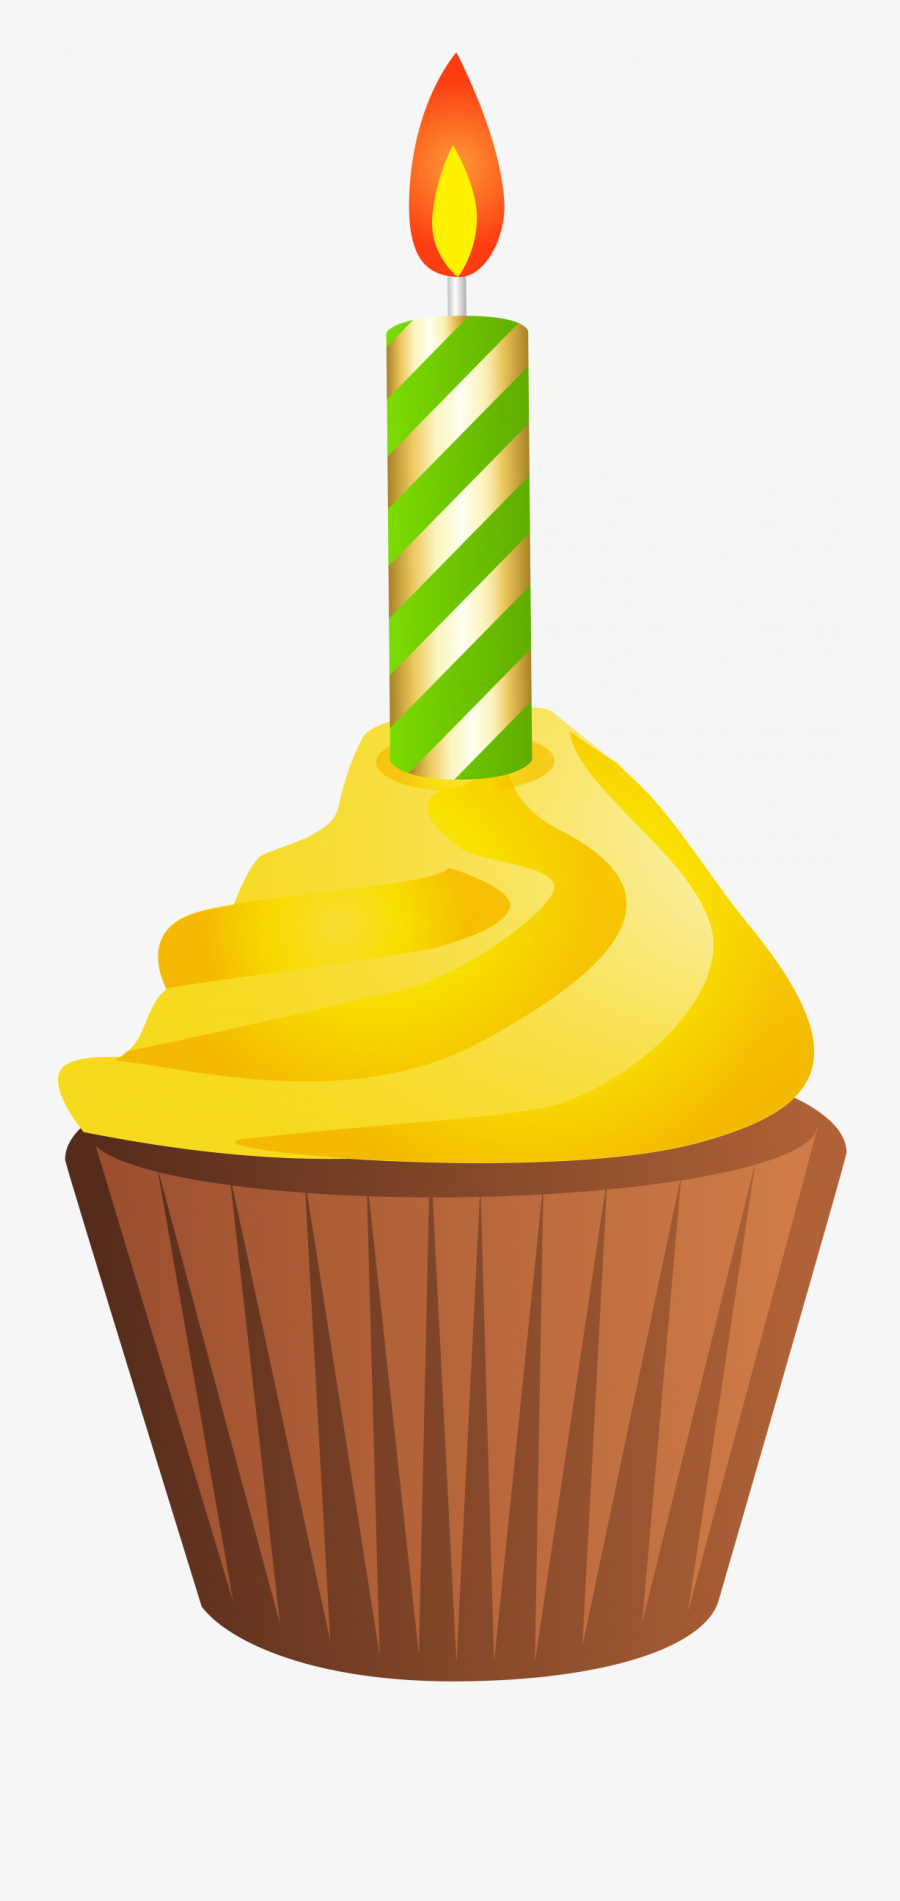 Happy Birthday Candle Png, Transparent Clipart